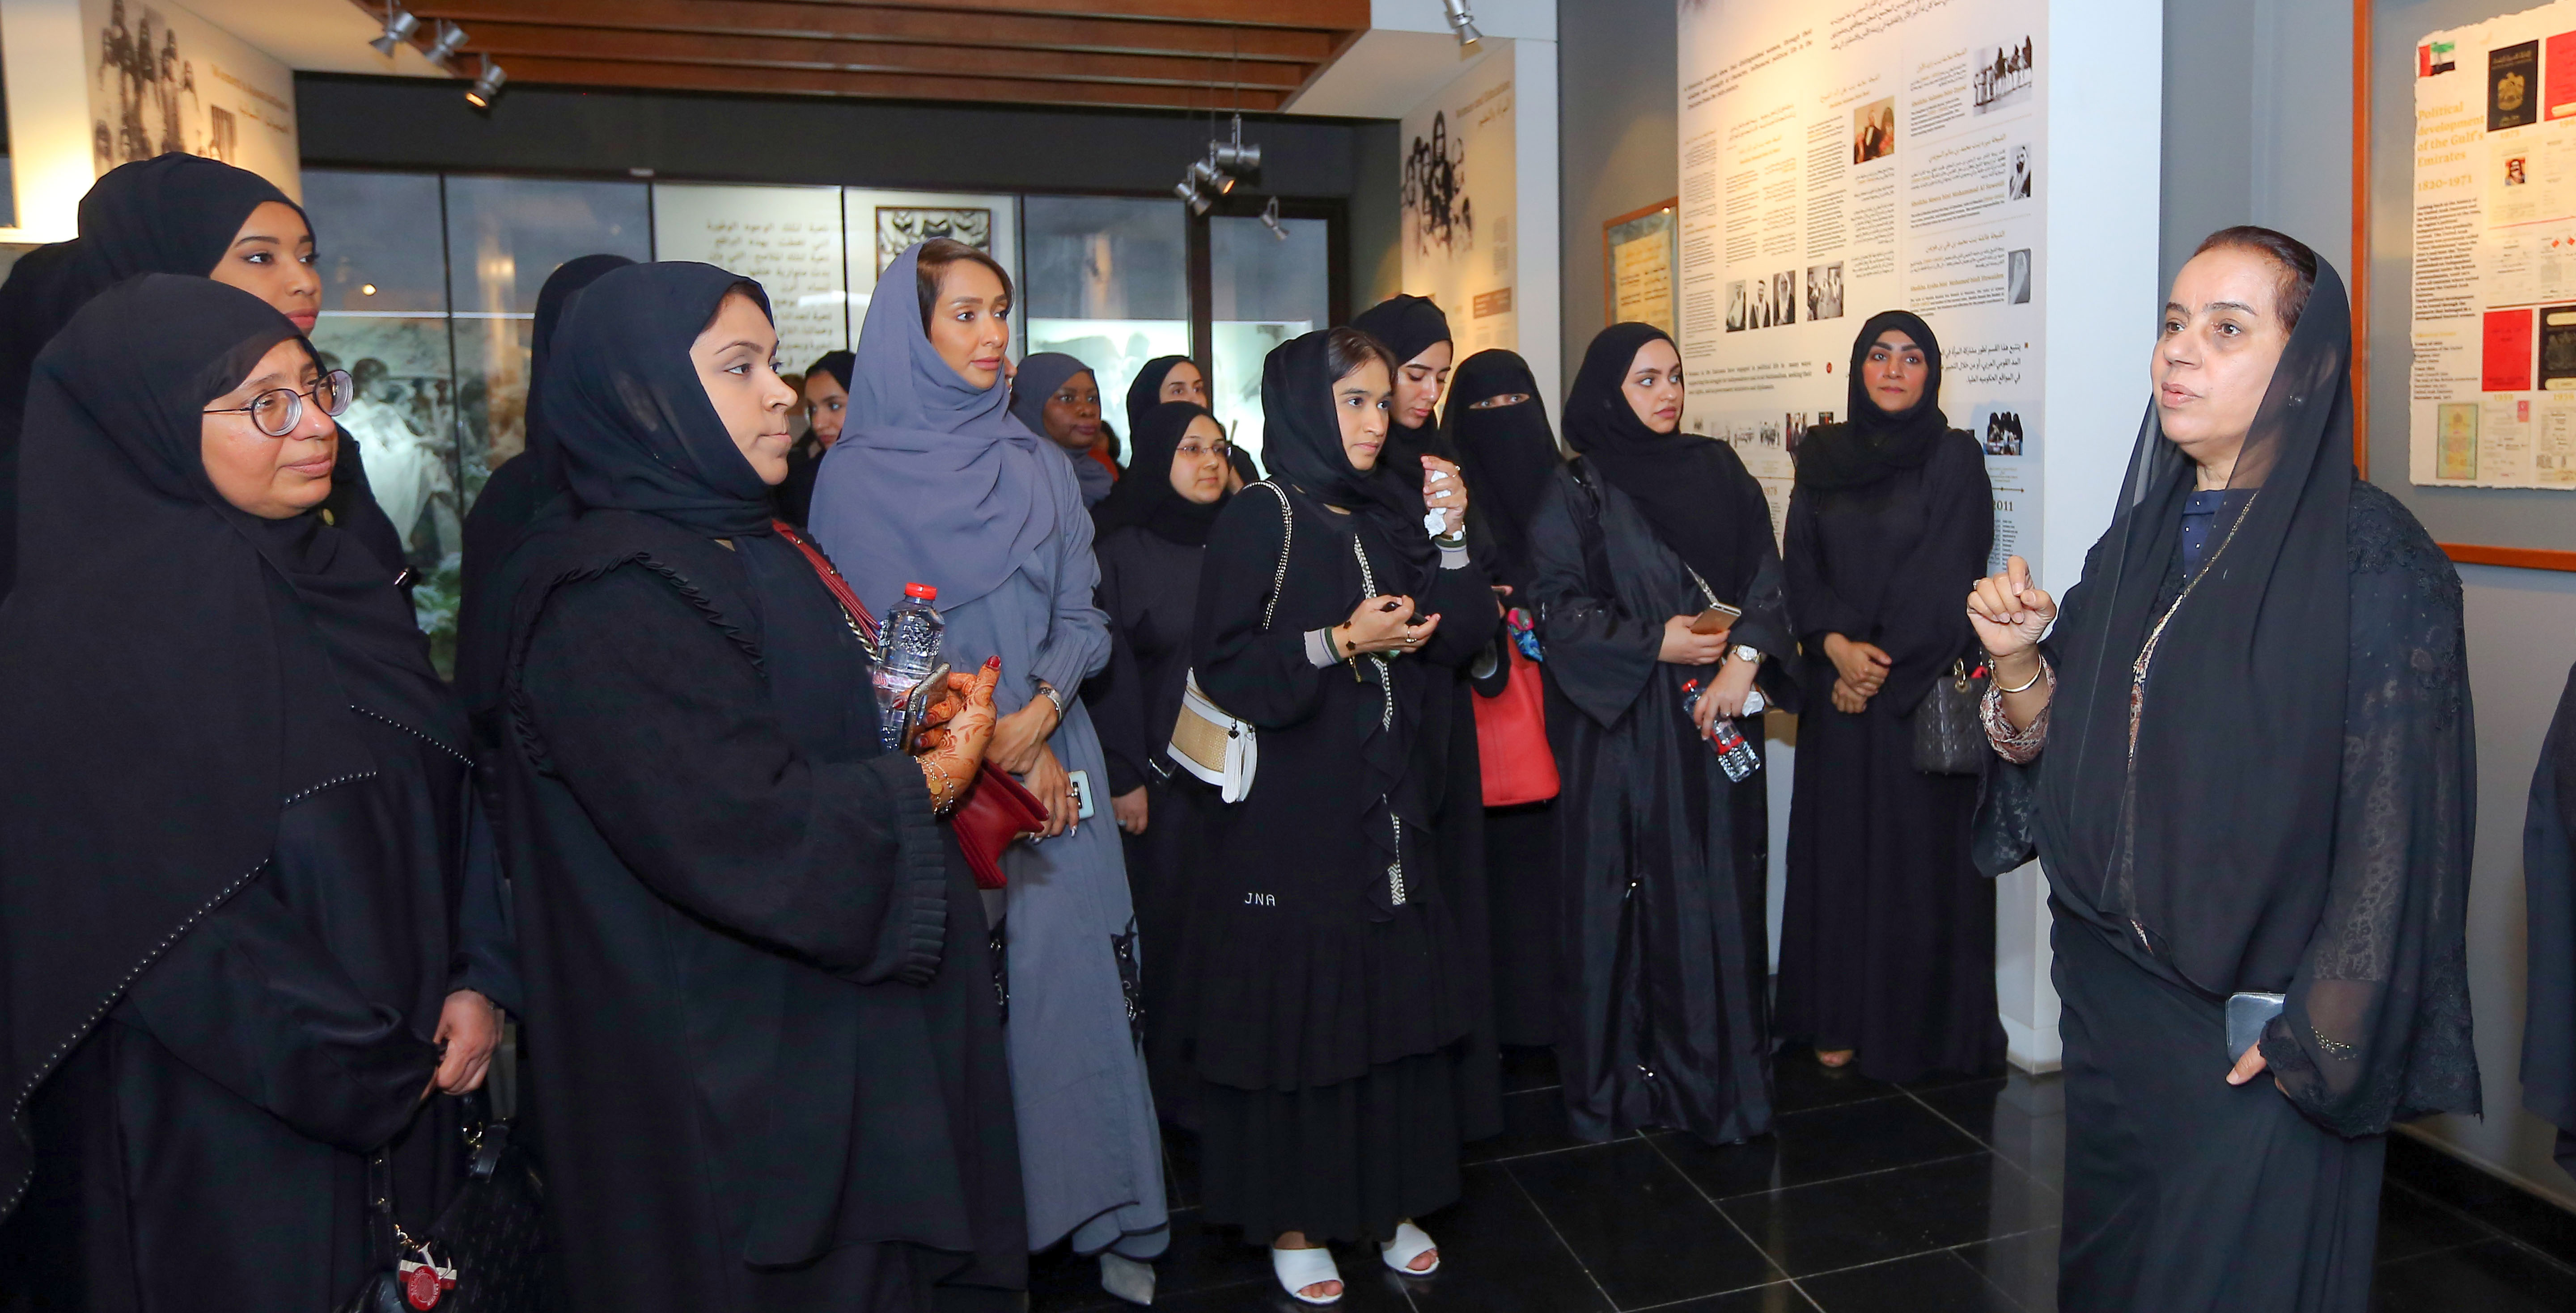 DEWA’s Women Committee organises visit for its female employees to Women’s Museum in Dubai